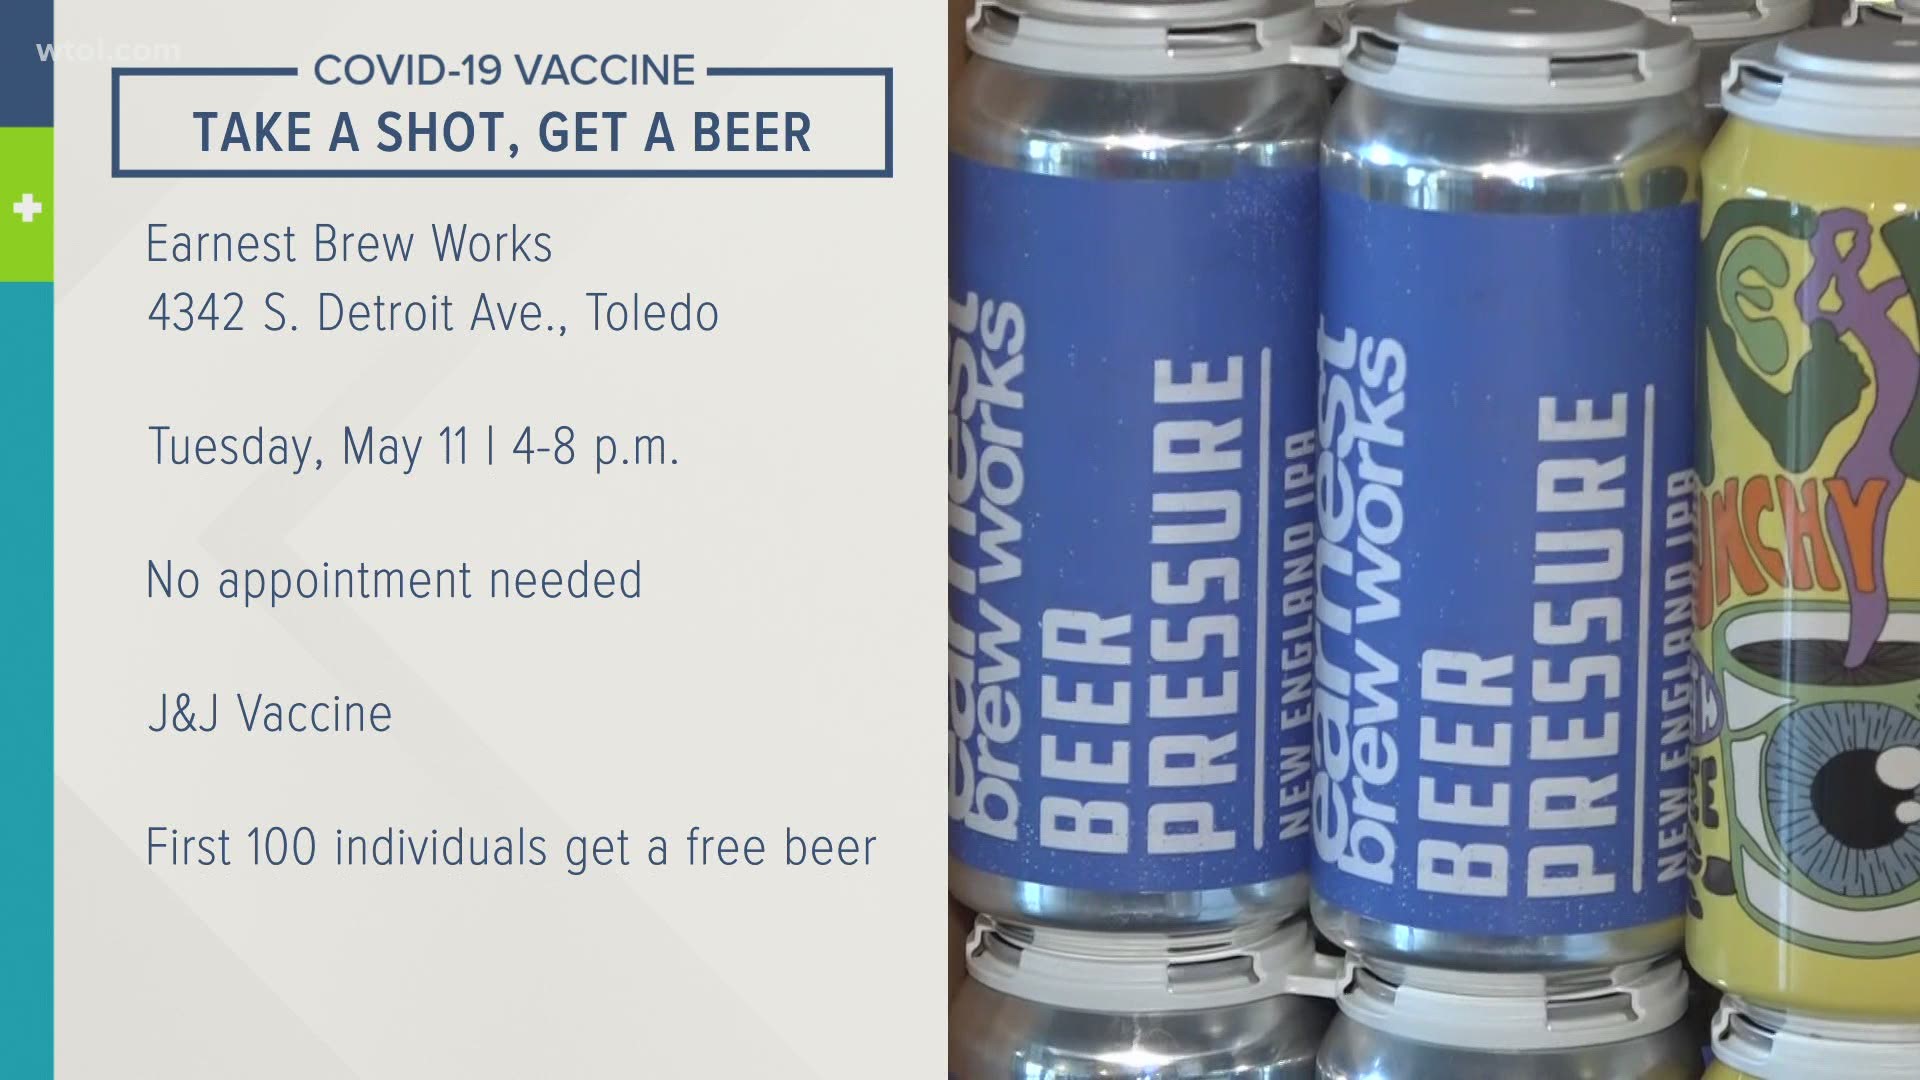 Earnest Brew Works on S. Detroit Ave. is offering the vaccines at an event on Tuesday from 4 to 8 p.m.